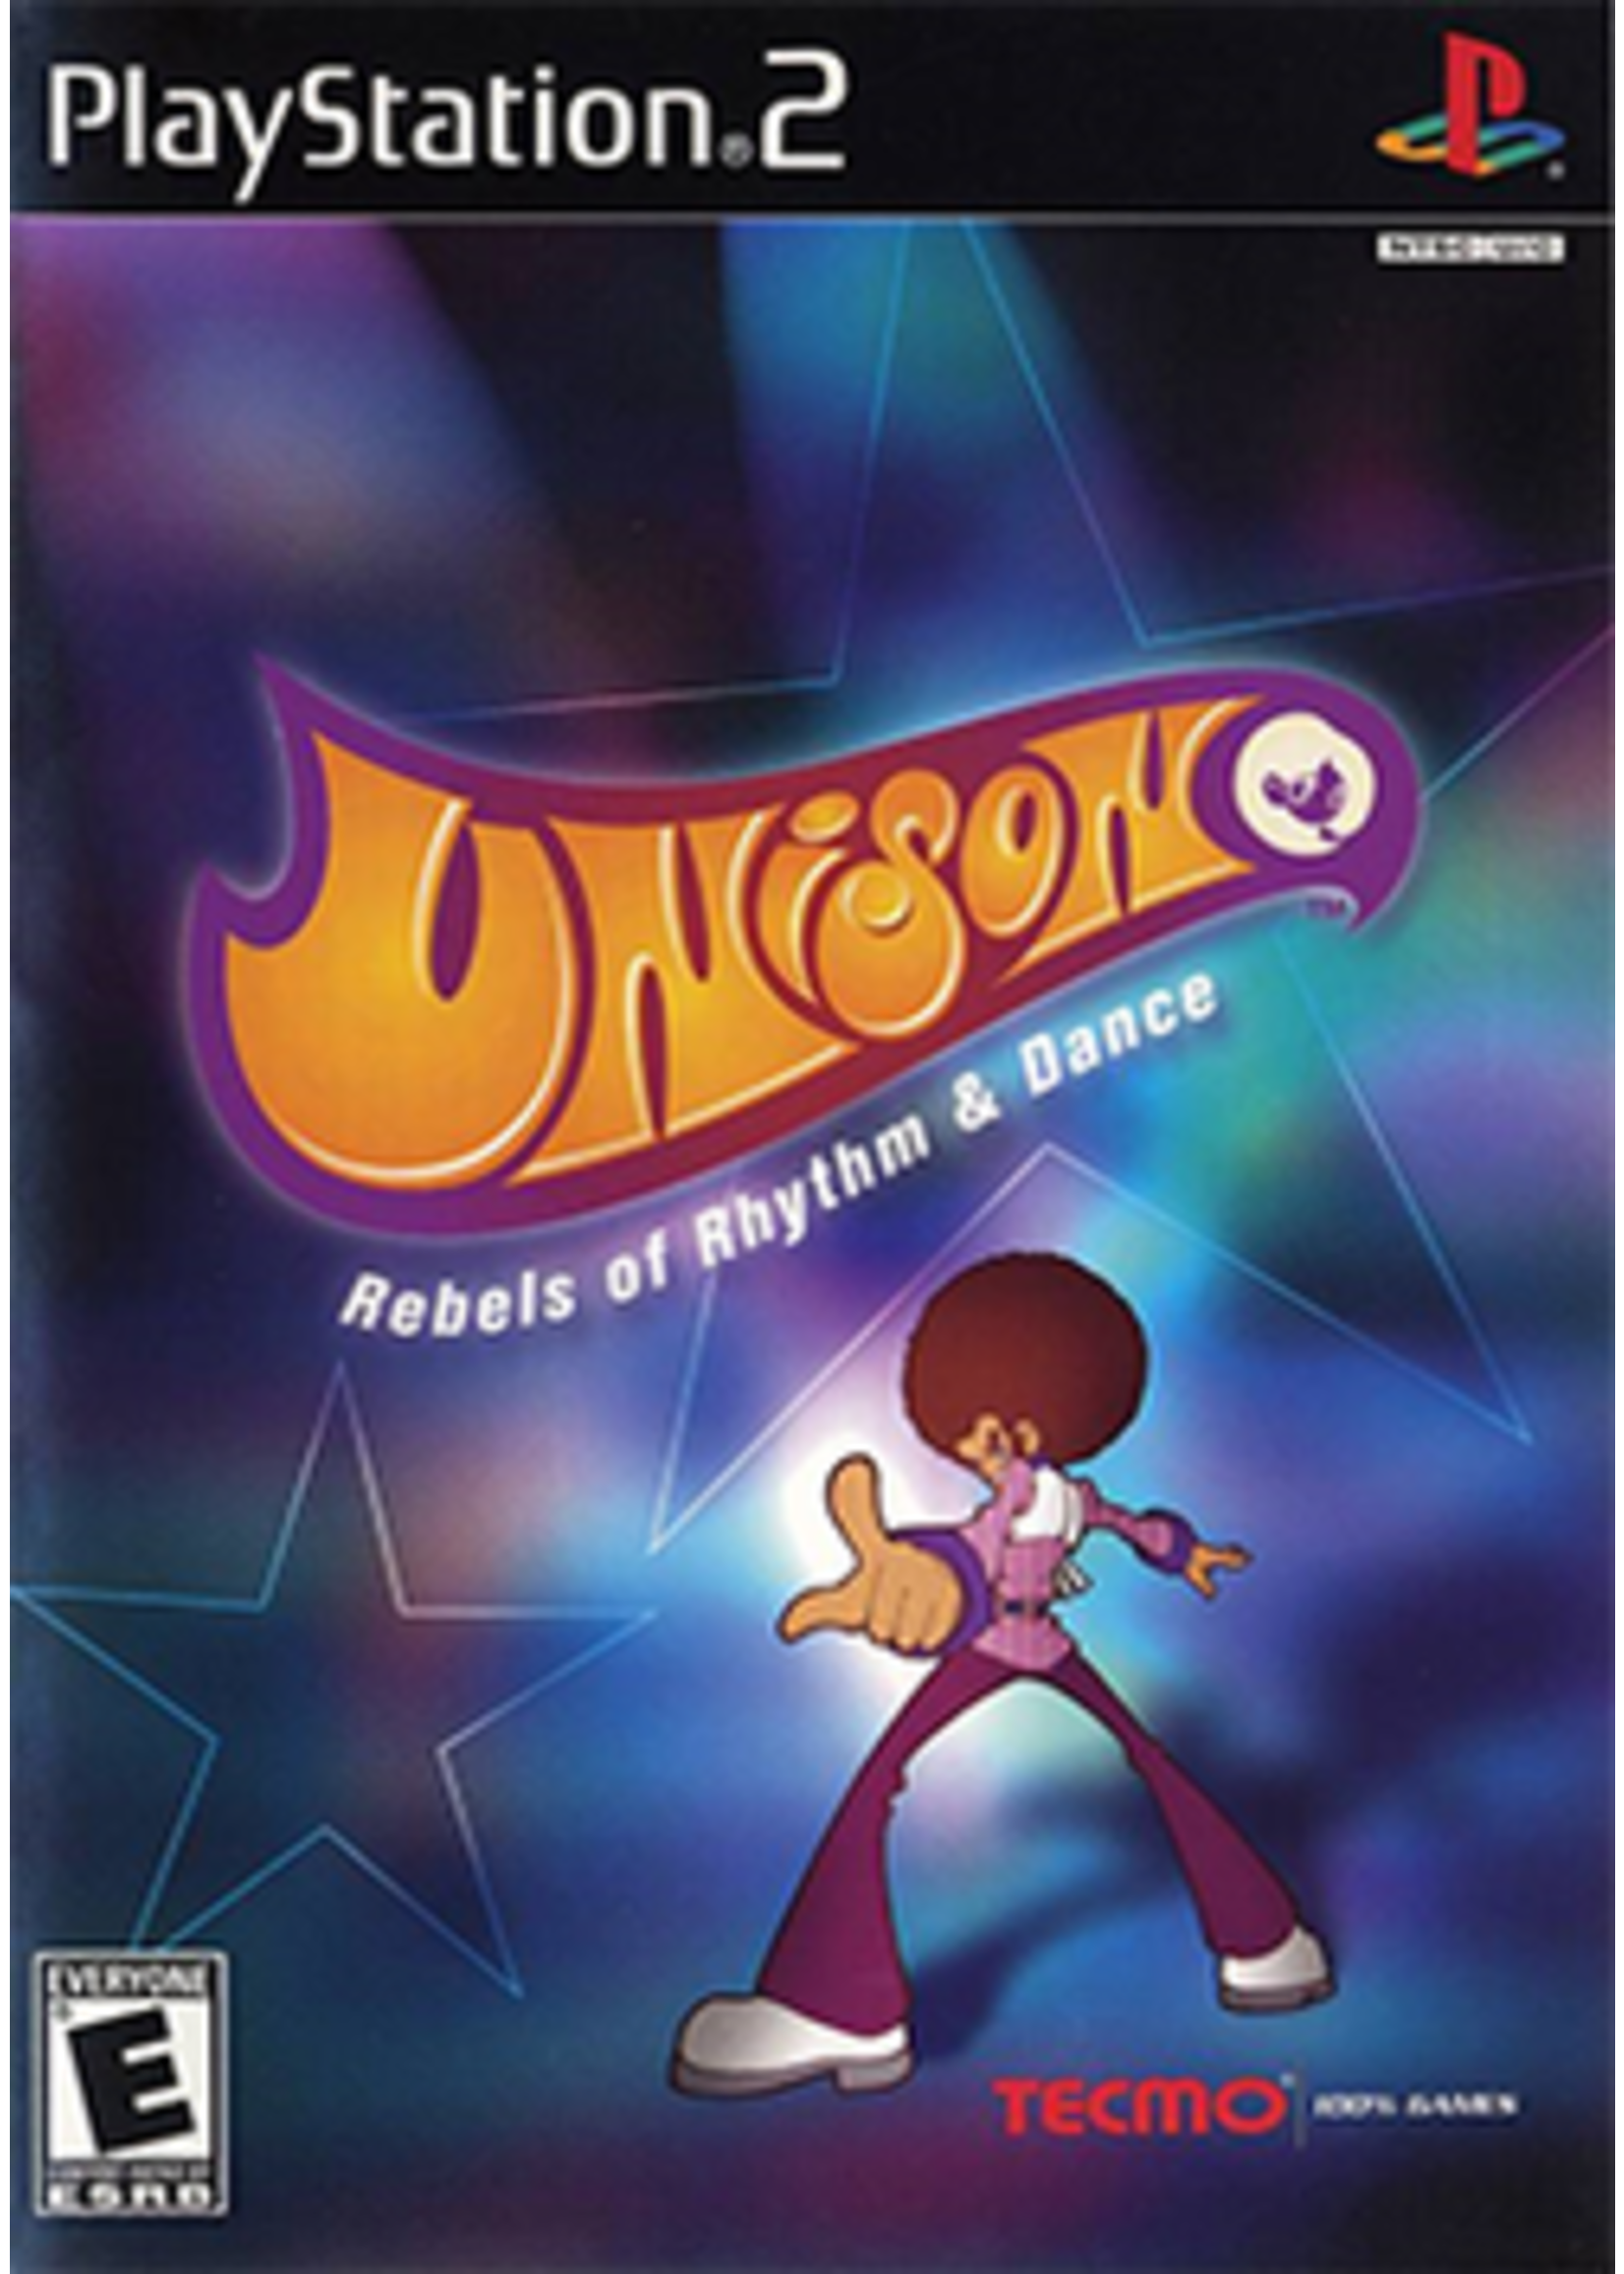 Sony Playstation 2 (PS2) Unison Rebels of Rhythm and Dance